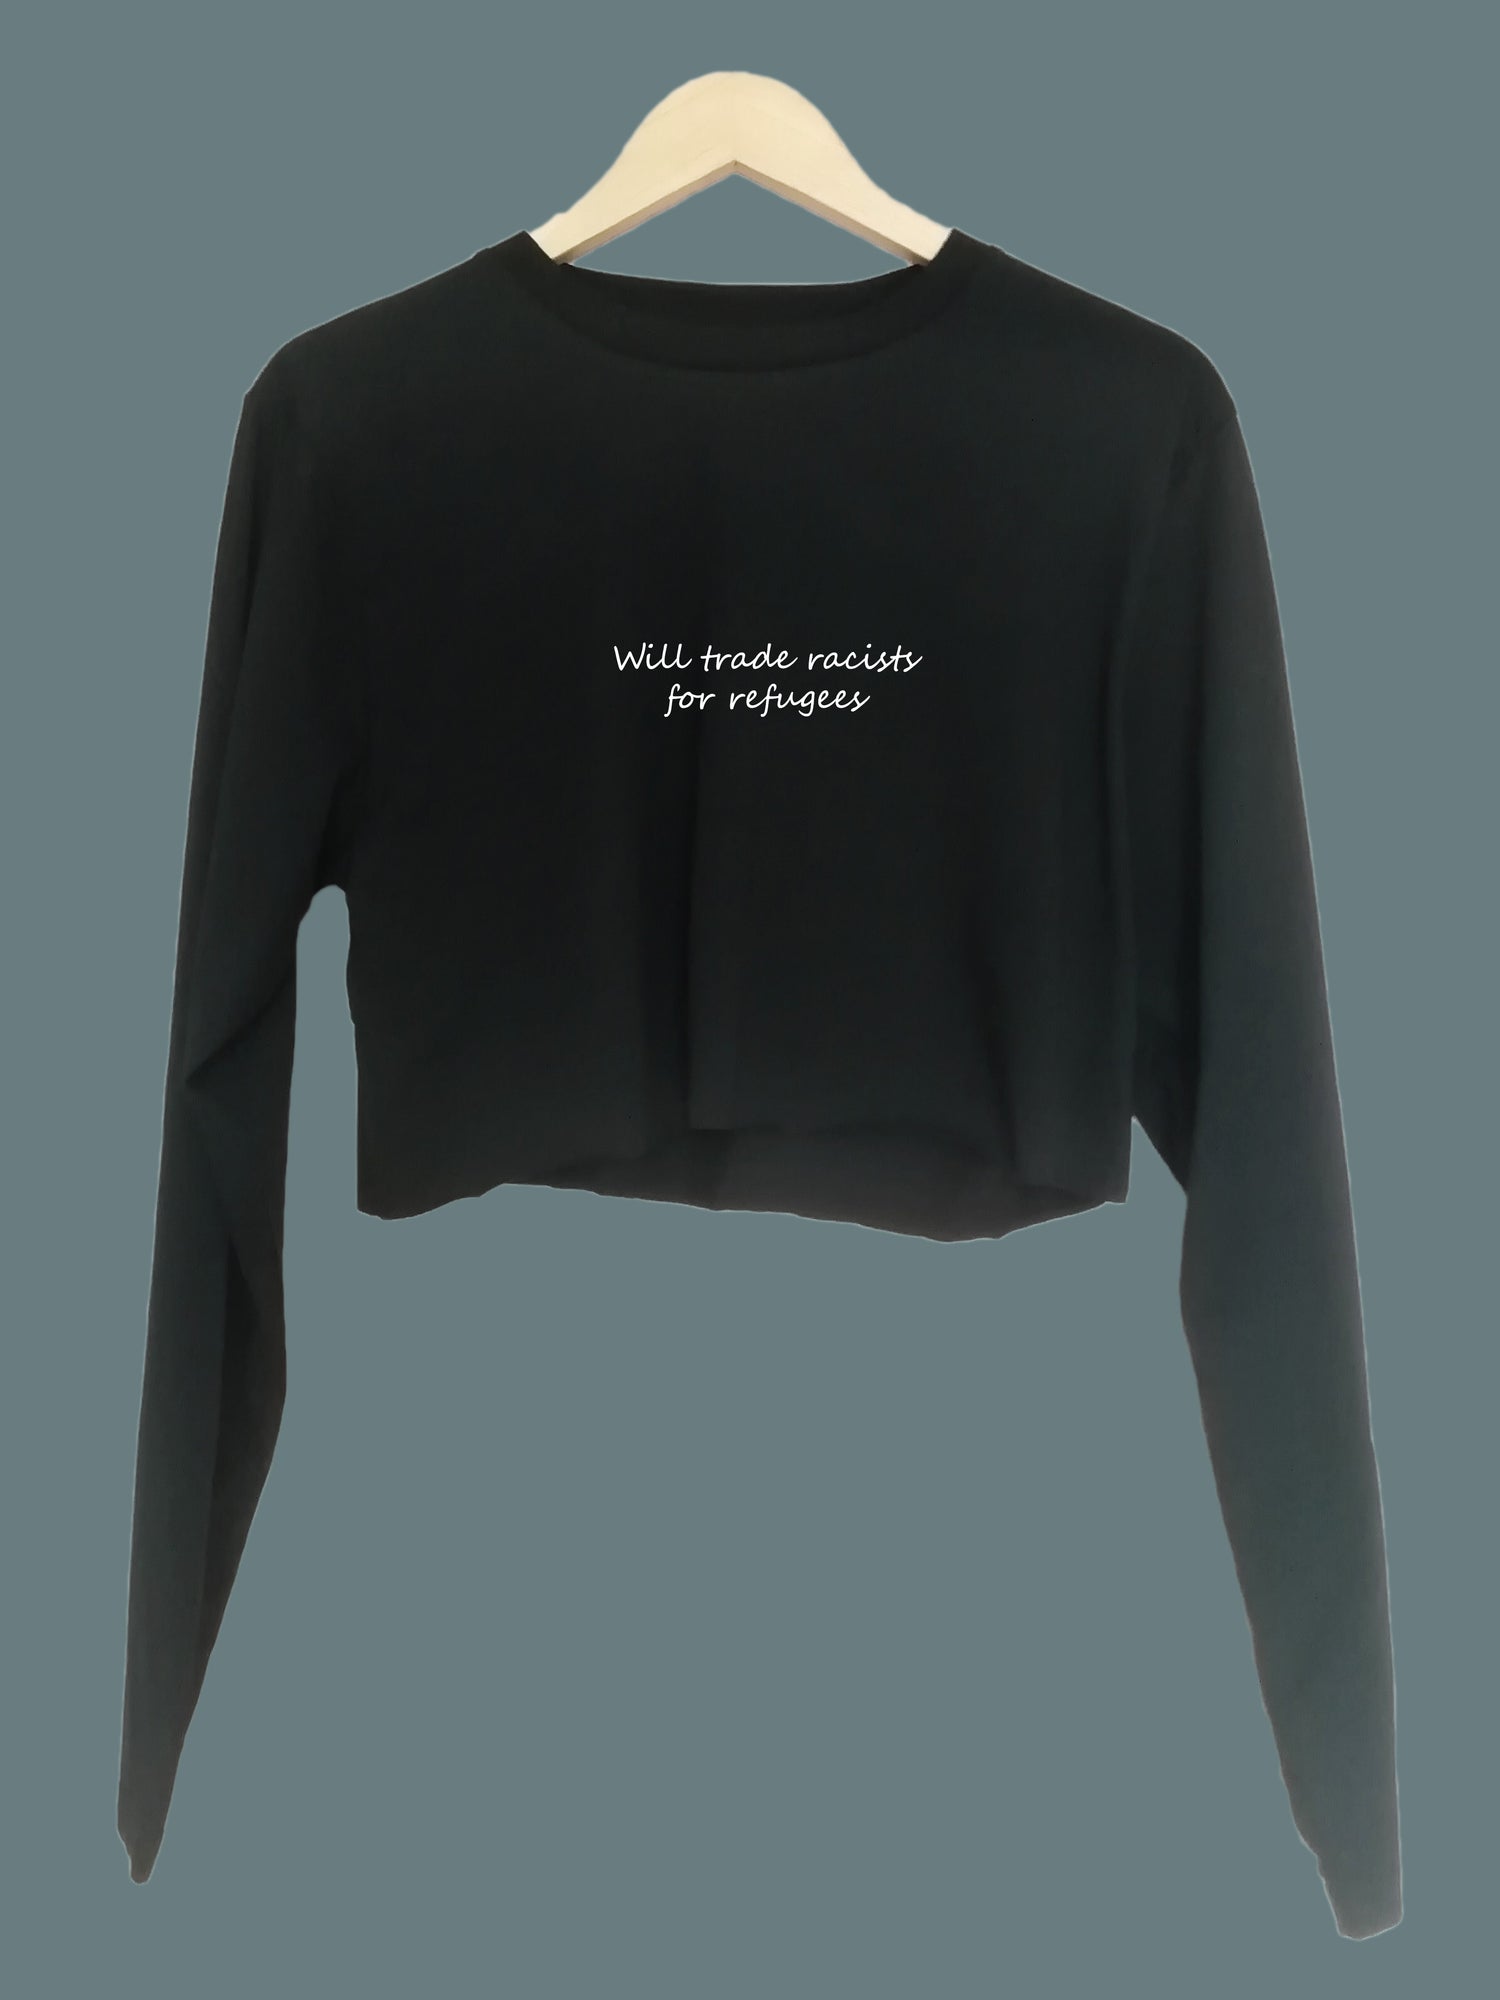 Will Trade racists for reguees Organic Long Sleeve raw edge crop